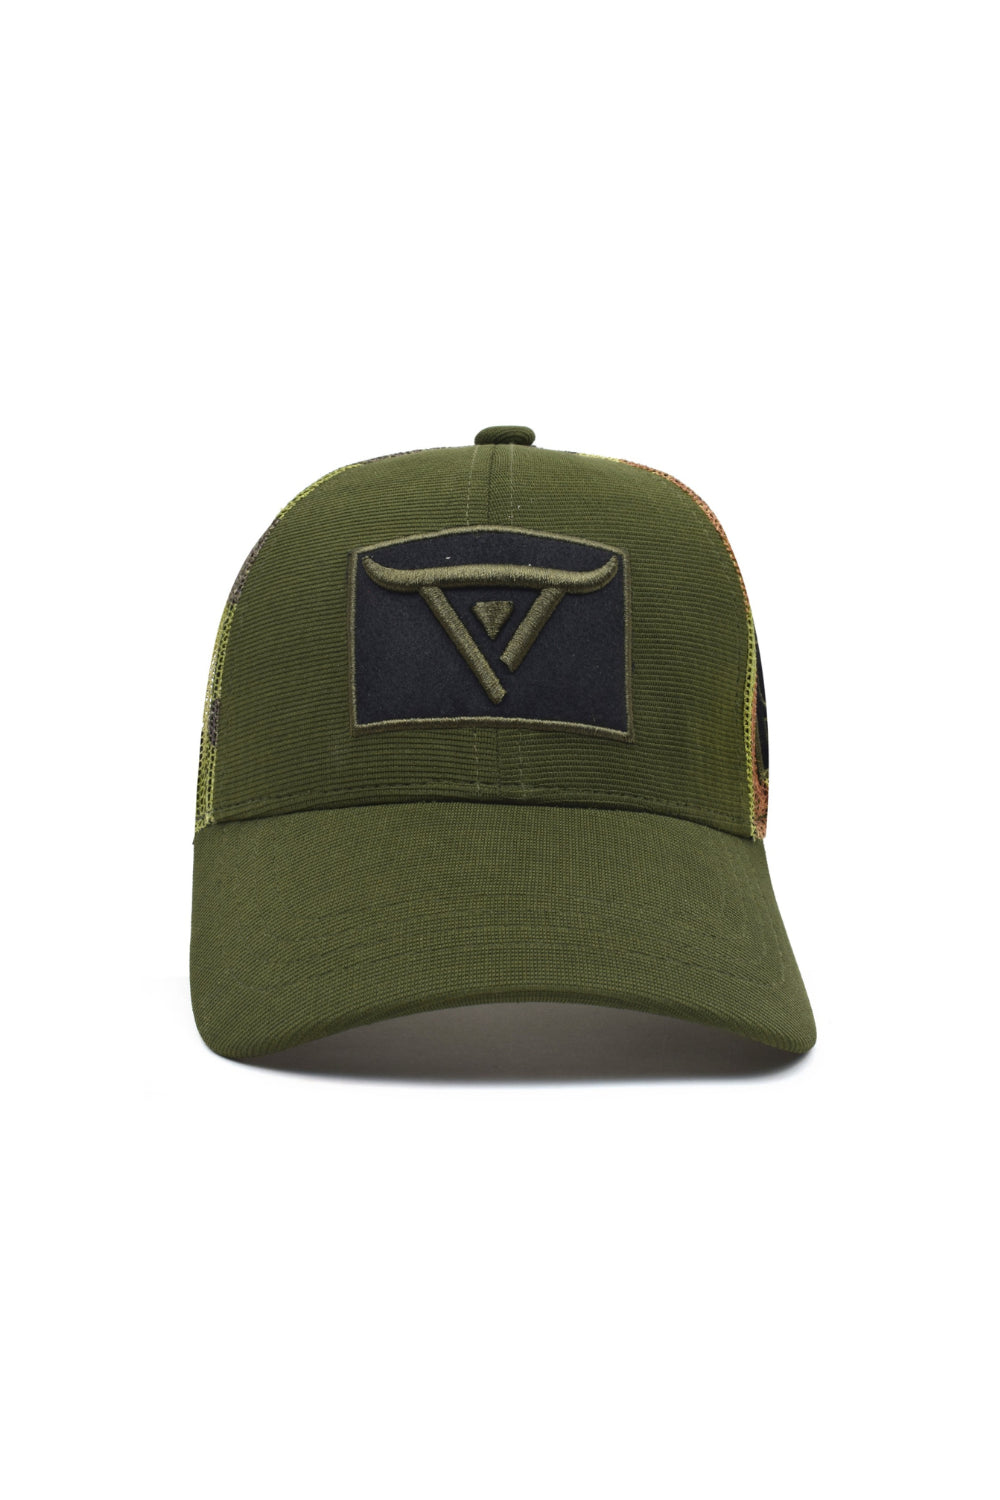 Unisex Olive Green Trucker cap, has a visor by One Player